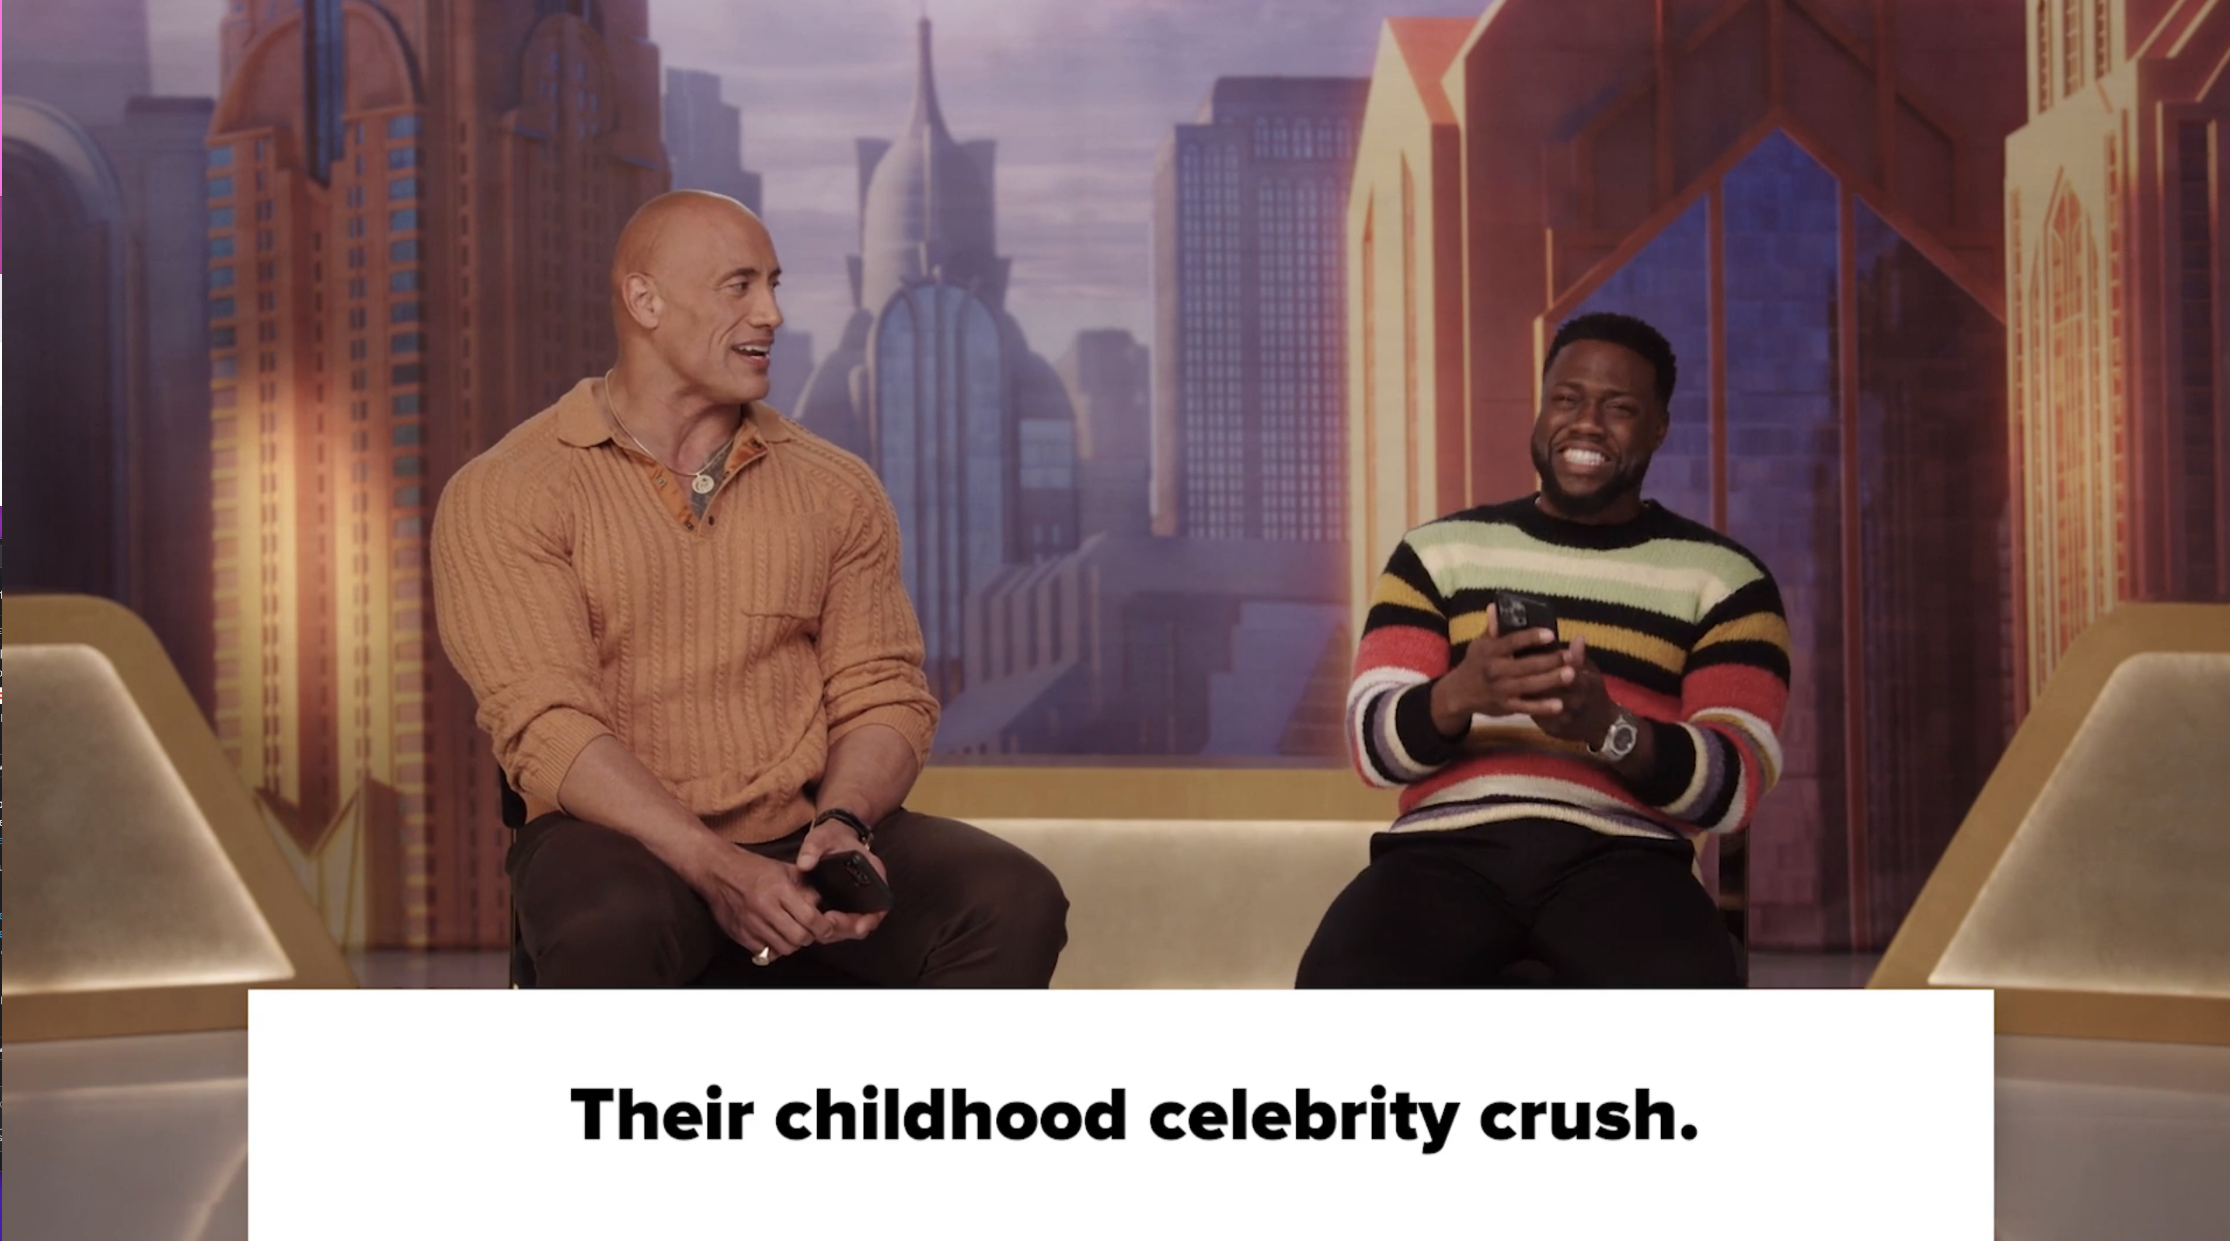 Kevin smiling while a caption reads &quot;Their childhood celebrity crush&quot;